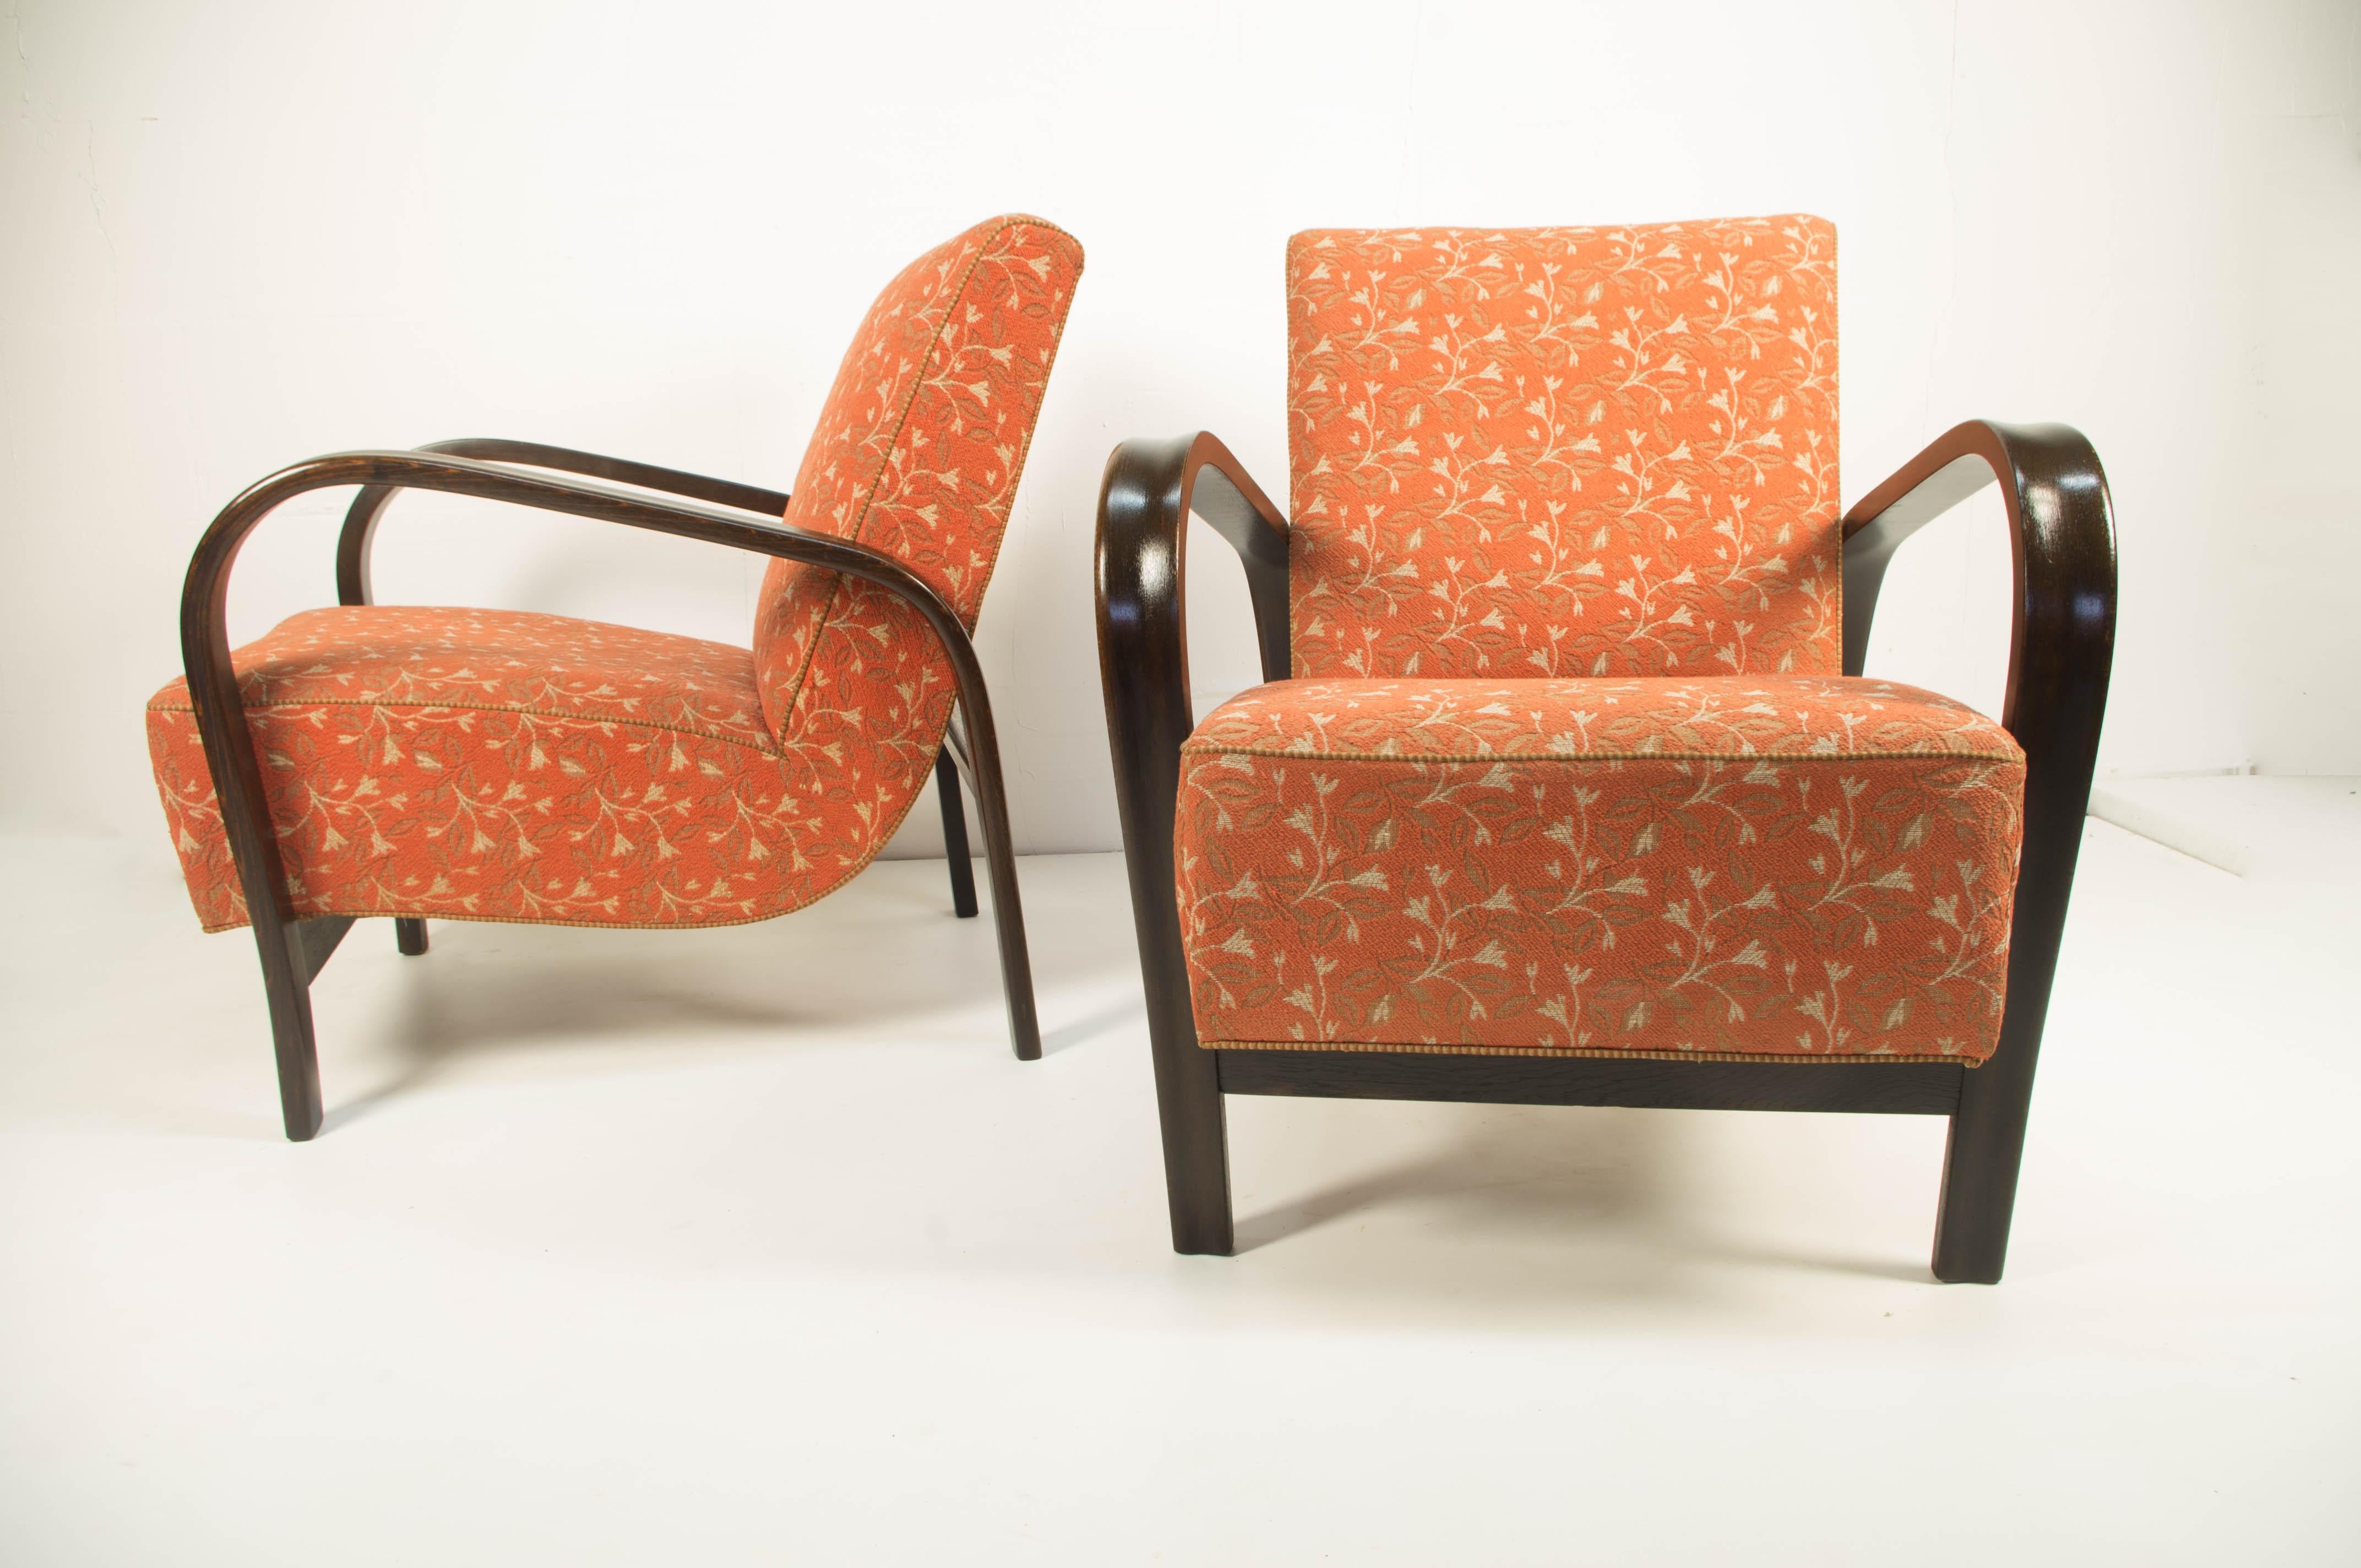 Hardly to find so extremely preserved set of two armchairs by famous Czech designers Karel Kozelka and Antonin Kropacek. Original upholstery with flowered pattern in excellent condition was professionally cleaned. Wooden parts with beautiful patina